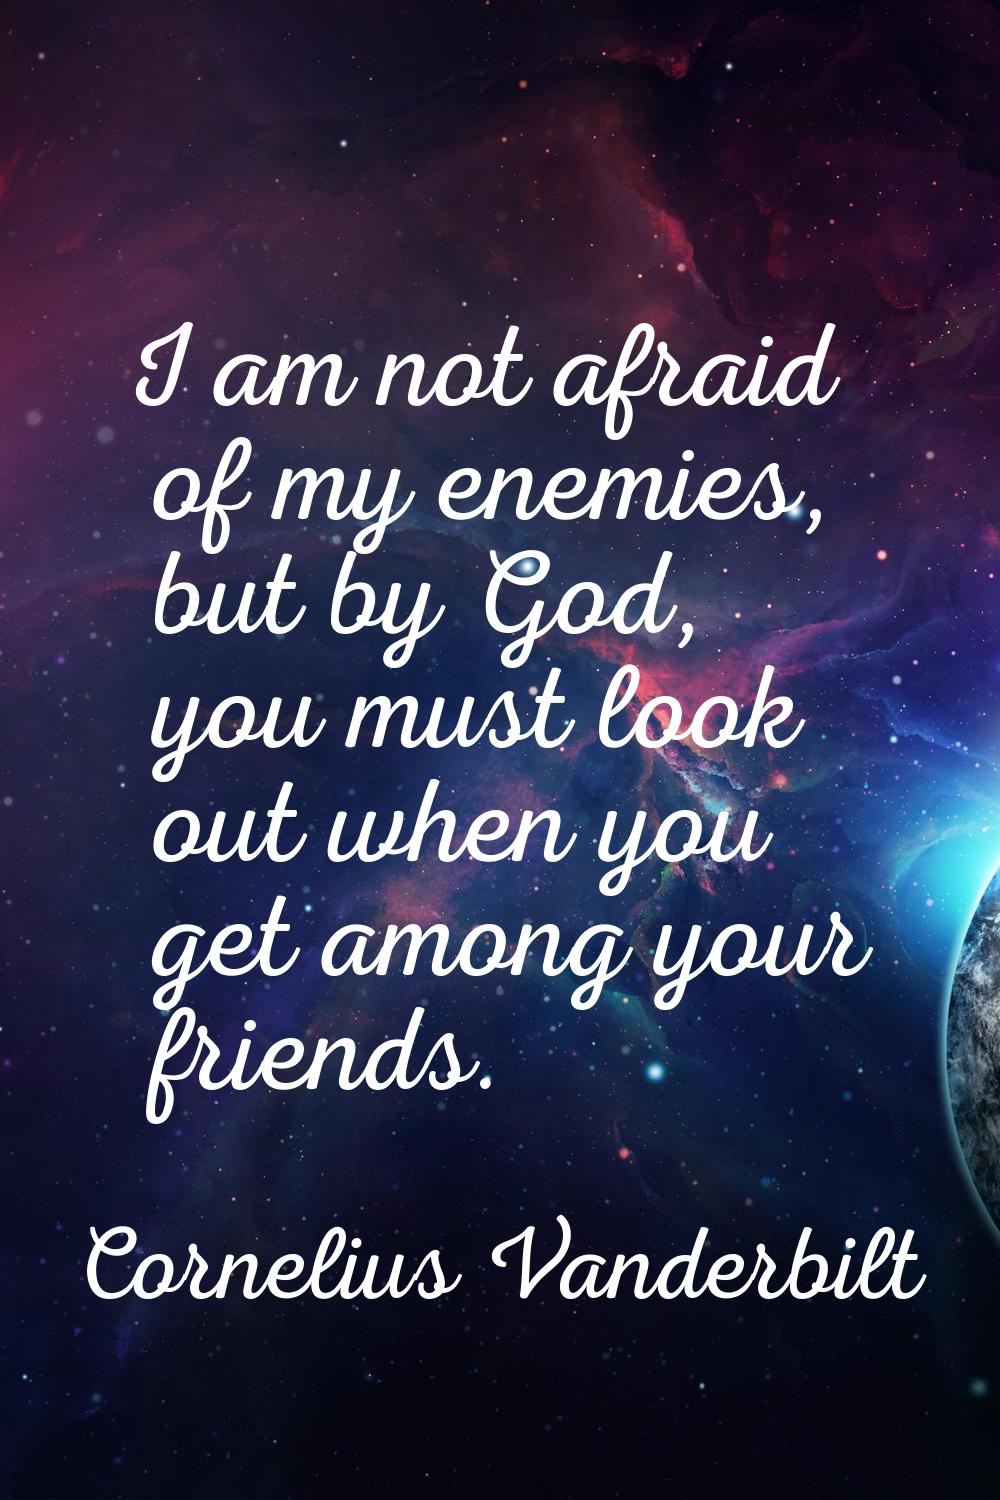 I am not afraid of my enemies, but by God, you must look out when you get among your friends.